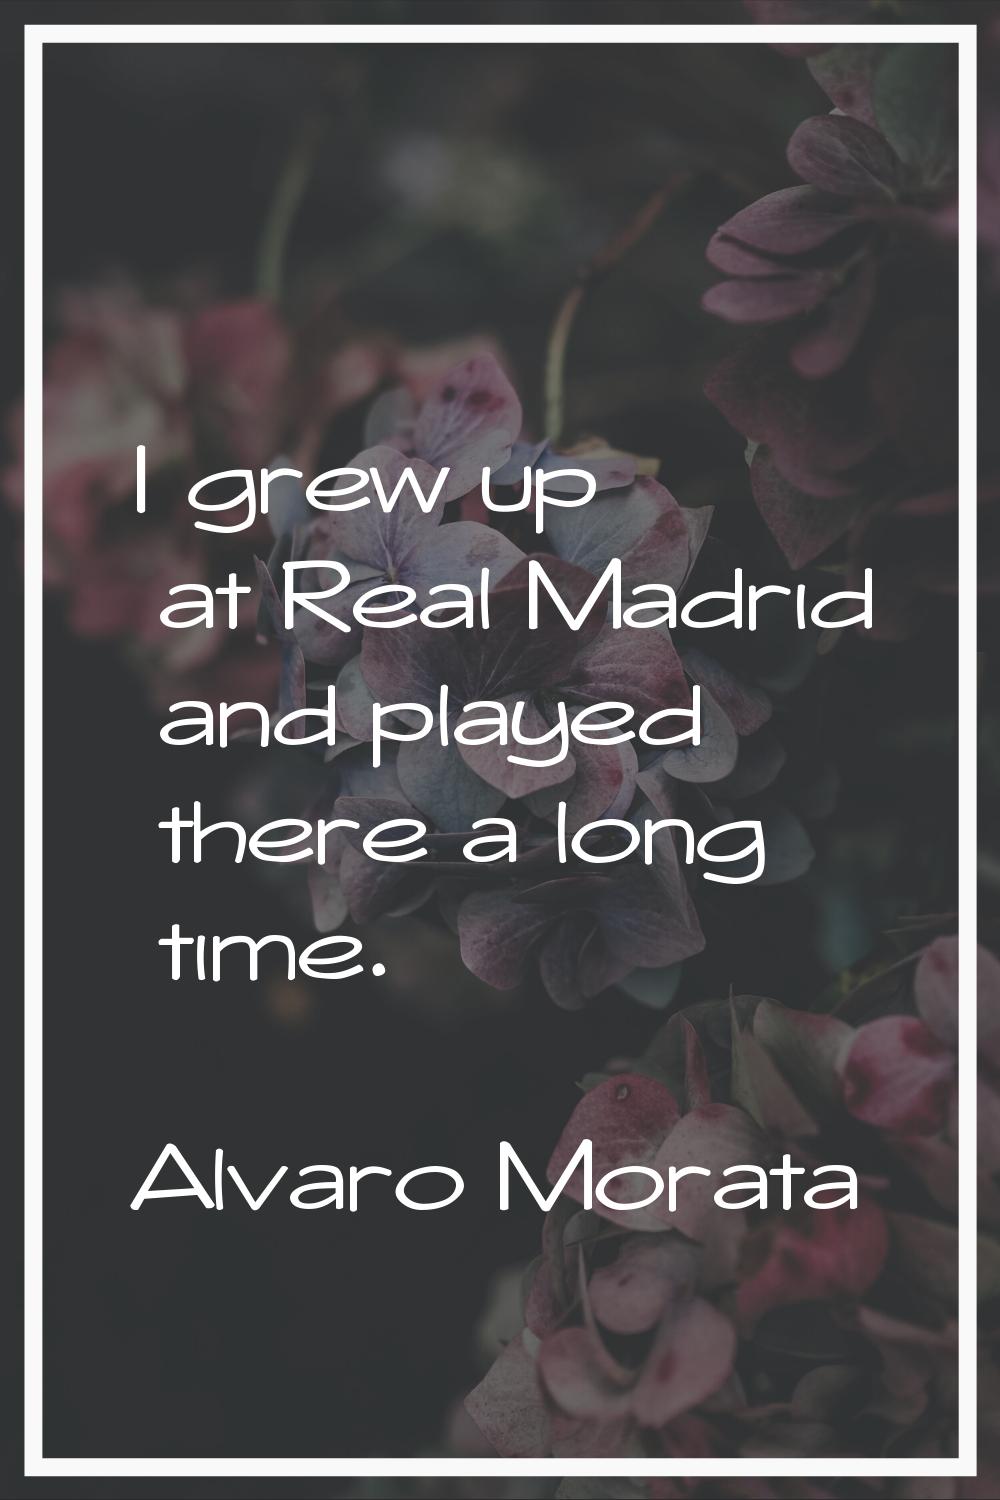 I grew up at Real Madrid and played there a long time.